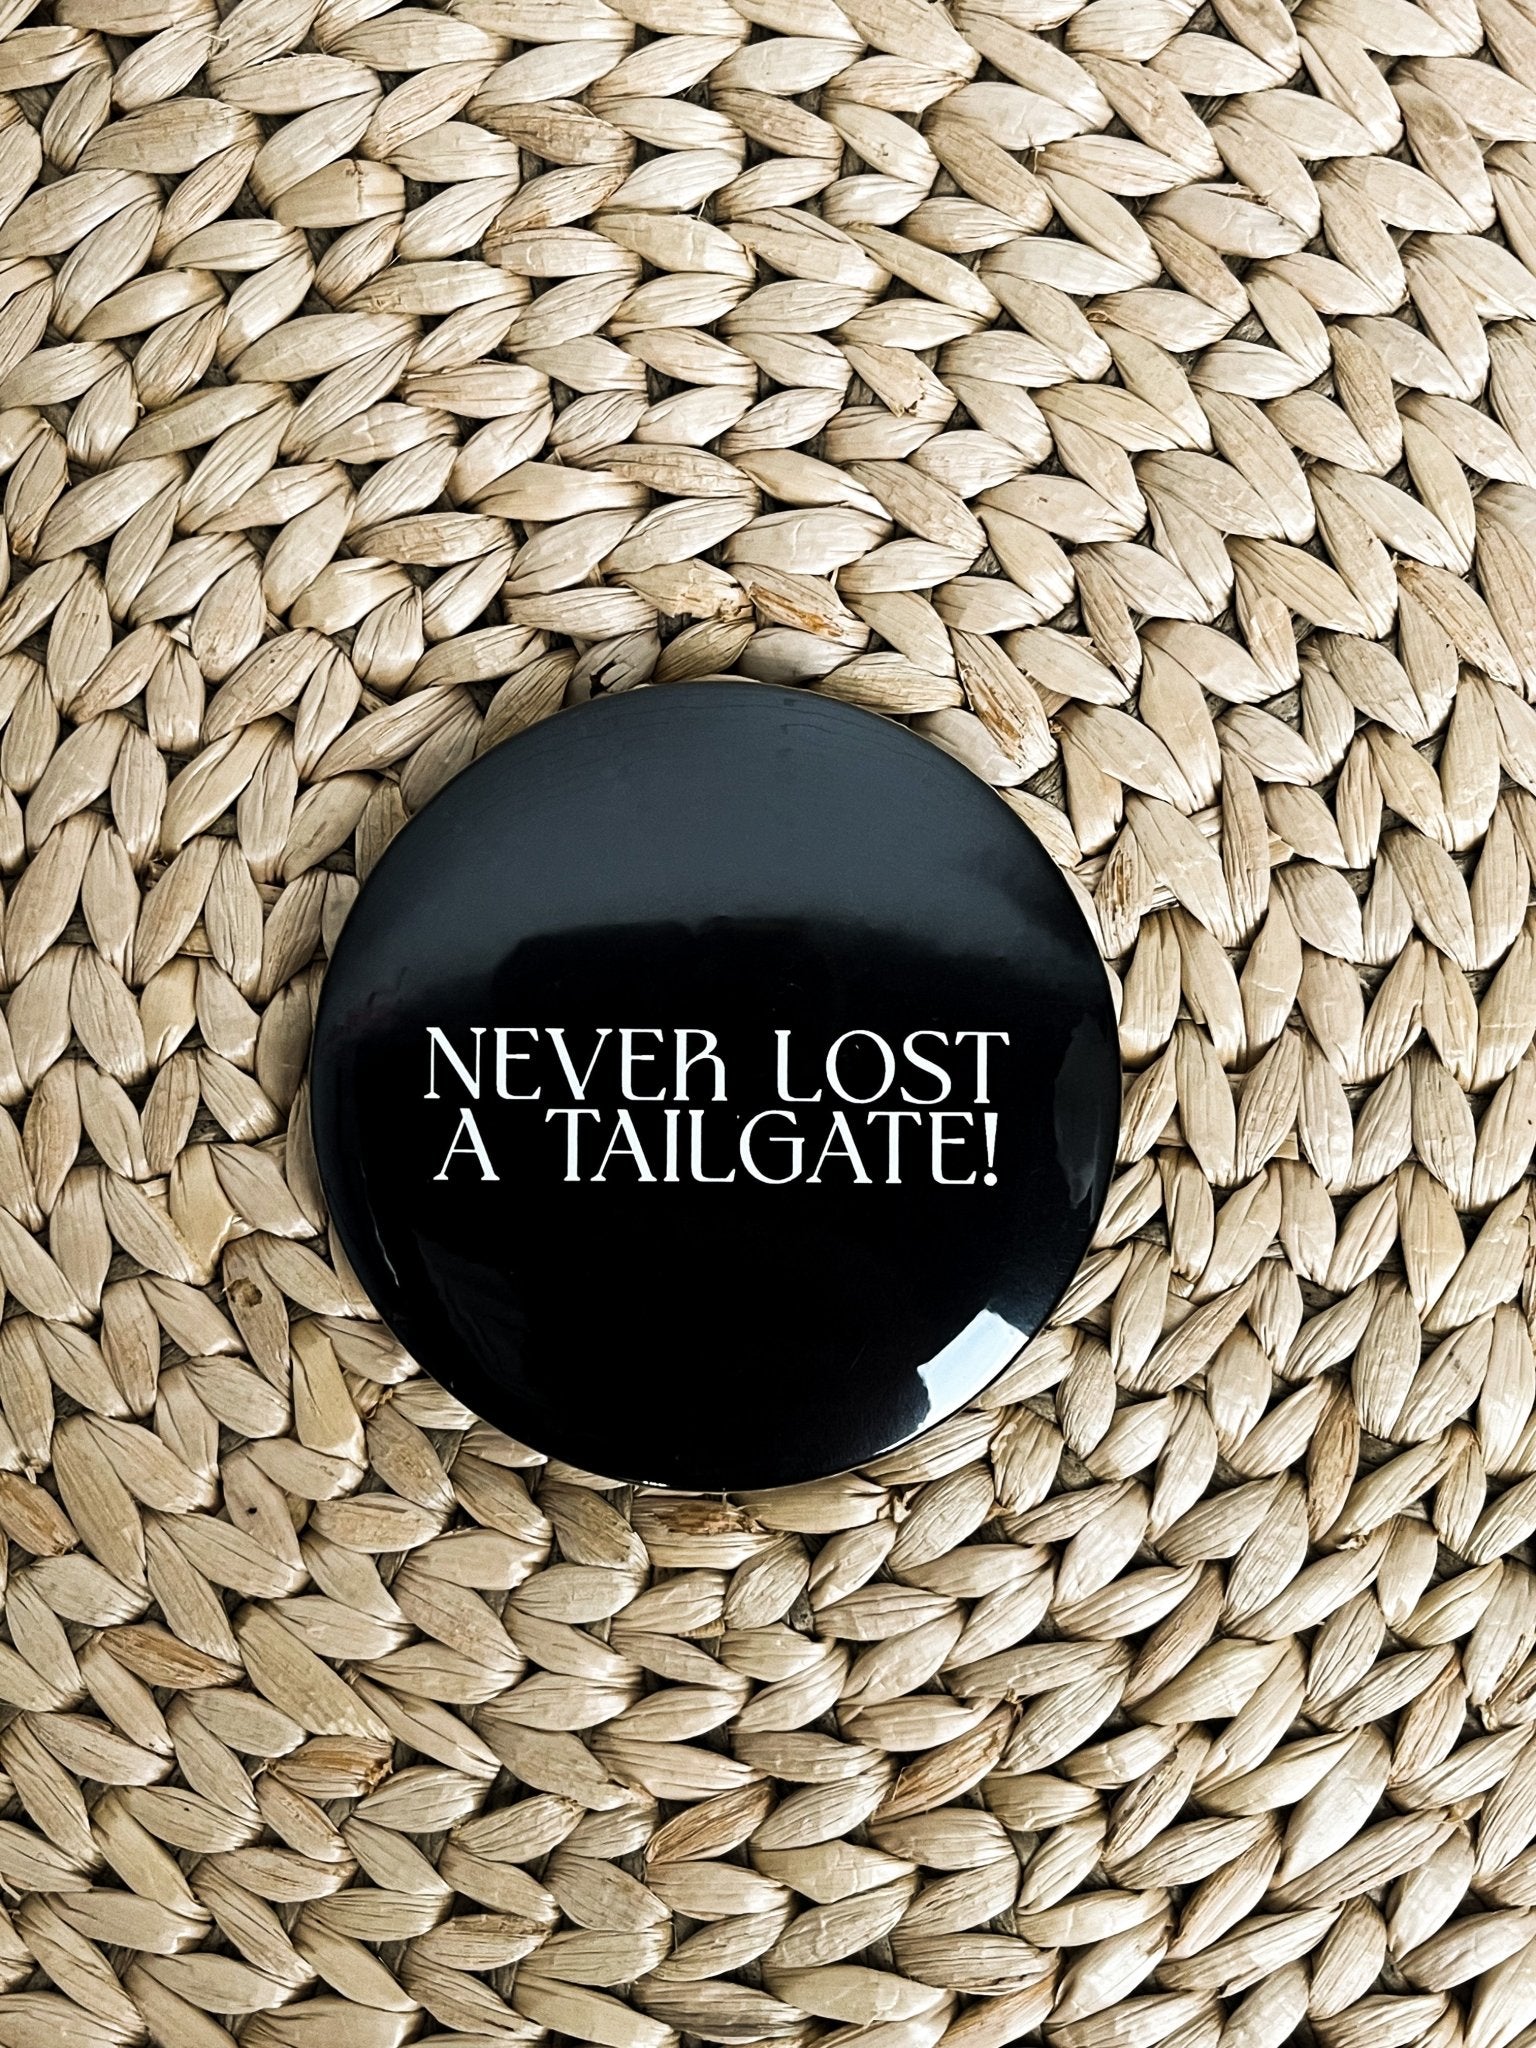 Never lost a tailgate 2.25 inch game day button black